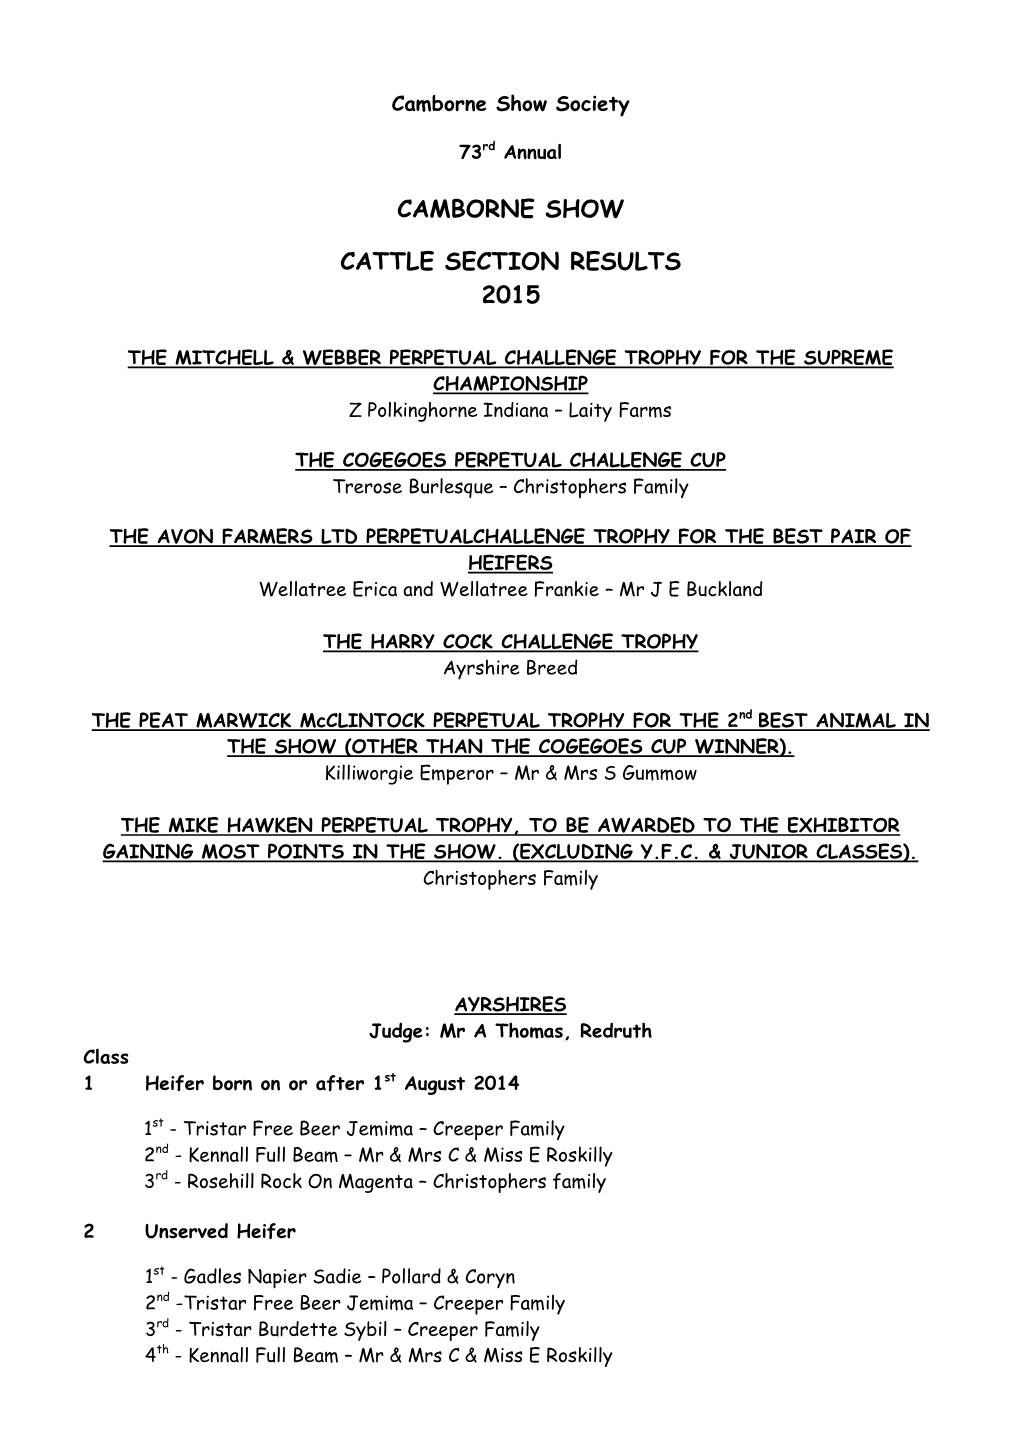 Camborne Show Cattle Section Results 2015